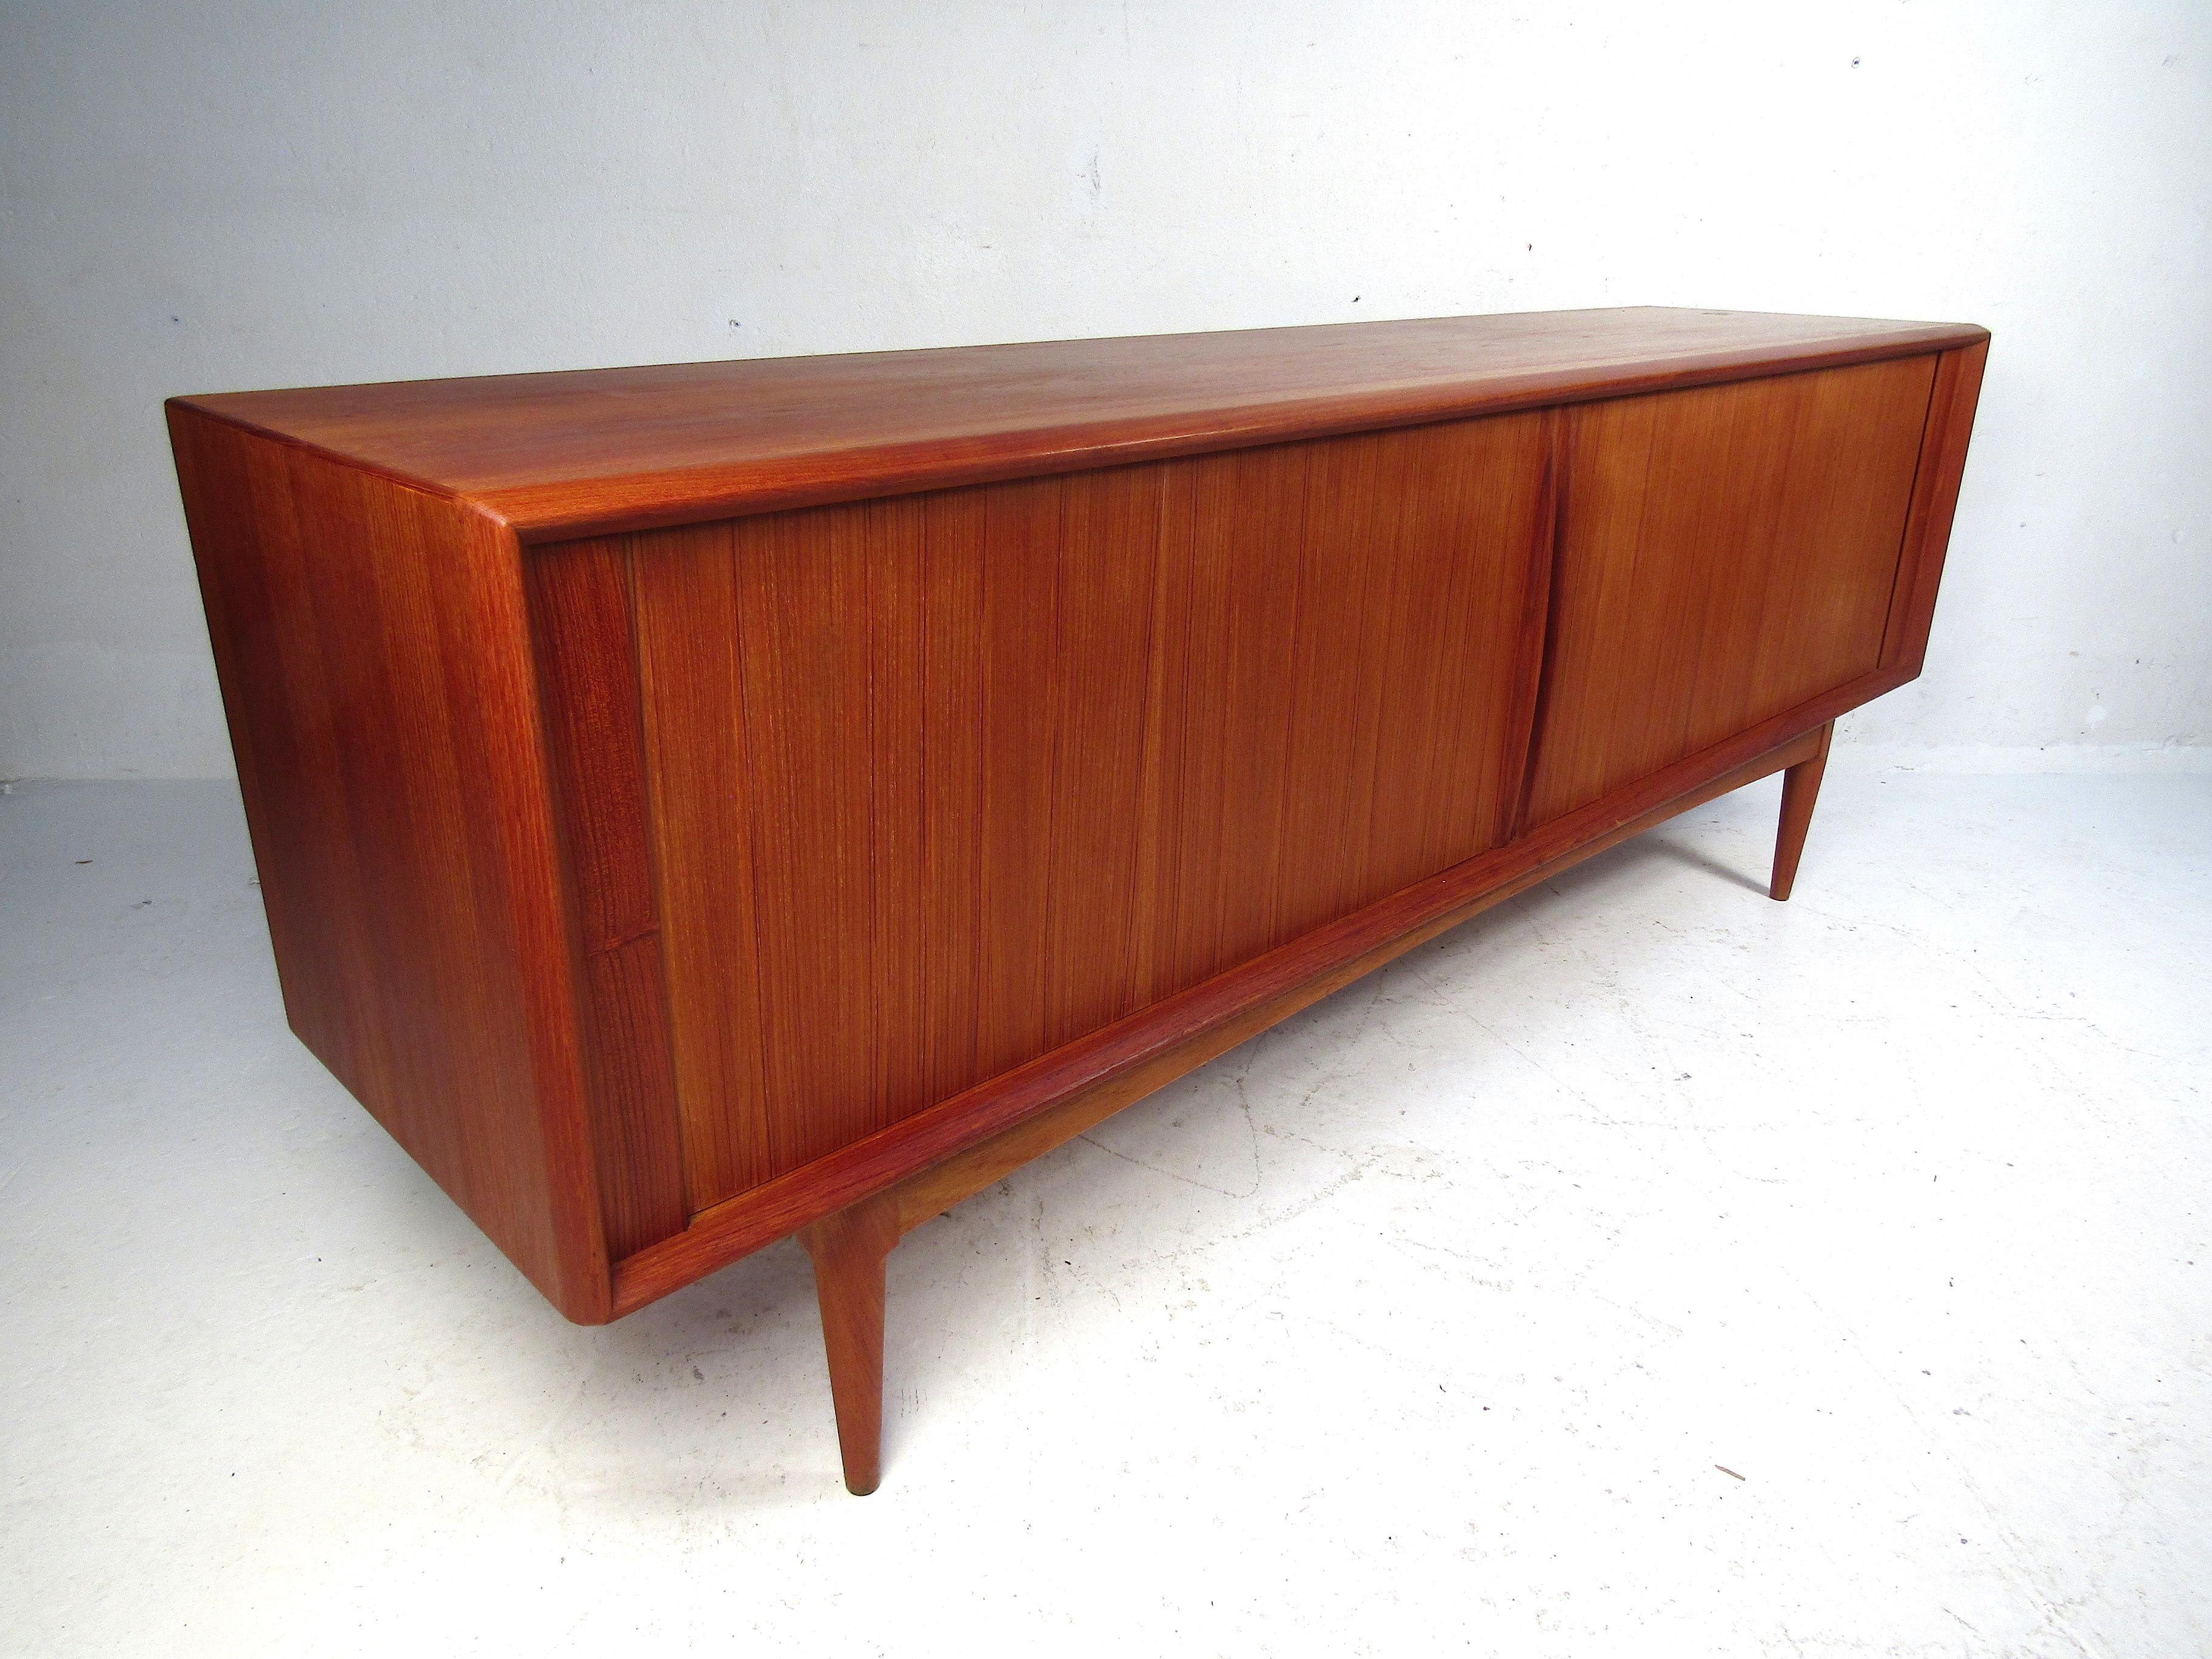 Stunning midcentury Danish credenza manufactured by Bernhard Pederson and Son. Long case piece with well-made tambour doors concealing the interior. Within the credenza are two sections of adjustable shelving, along with two dovetail-jointed drawers